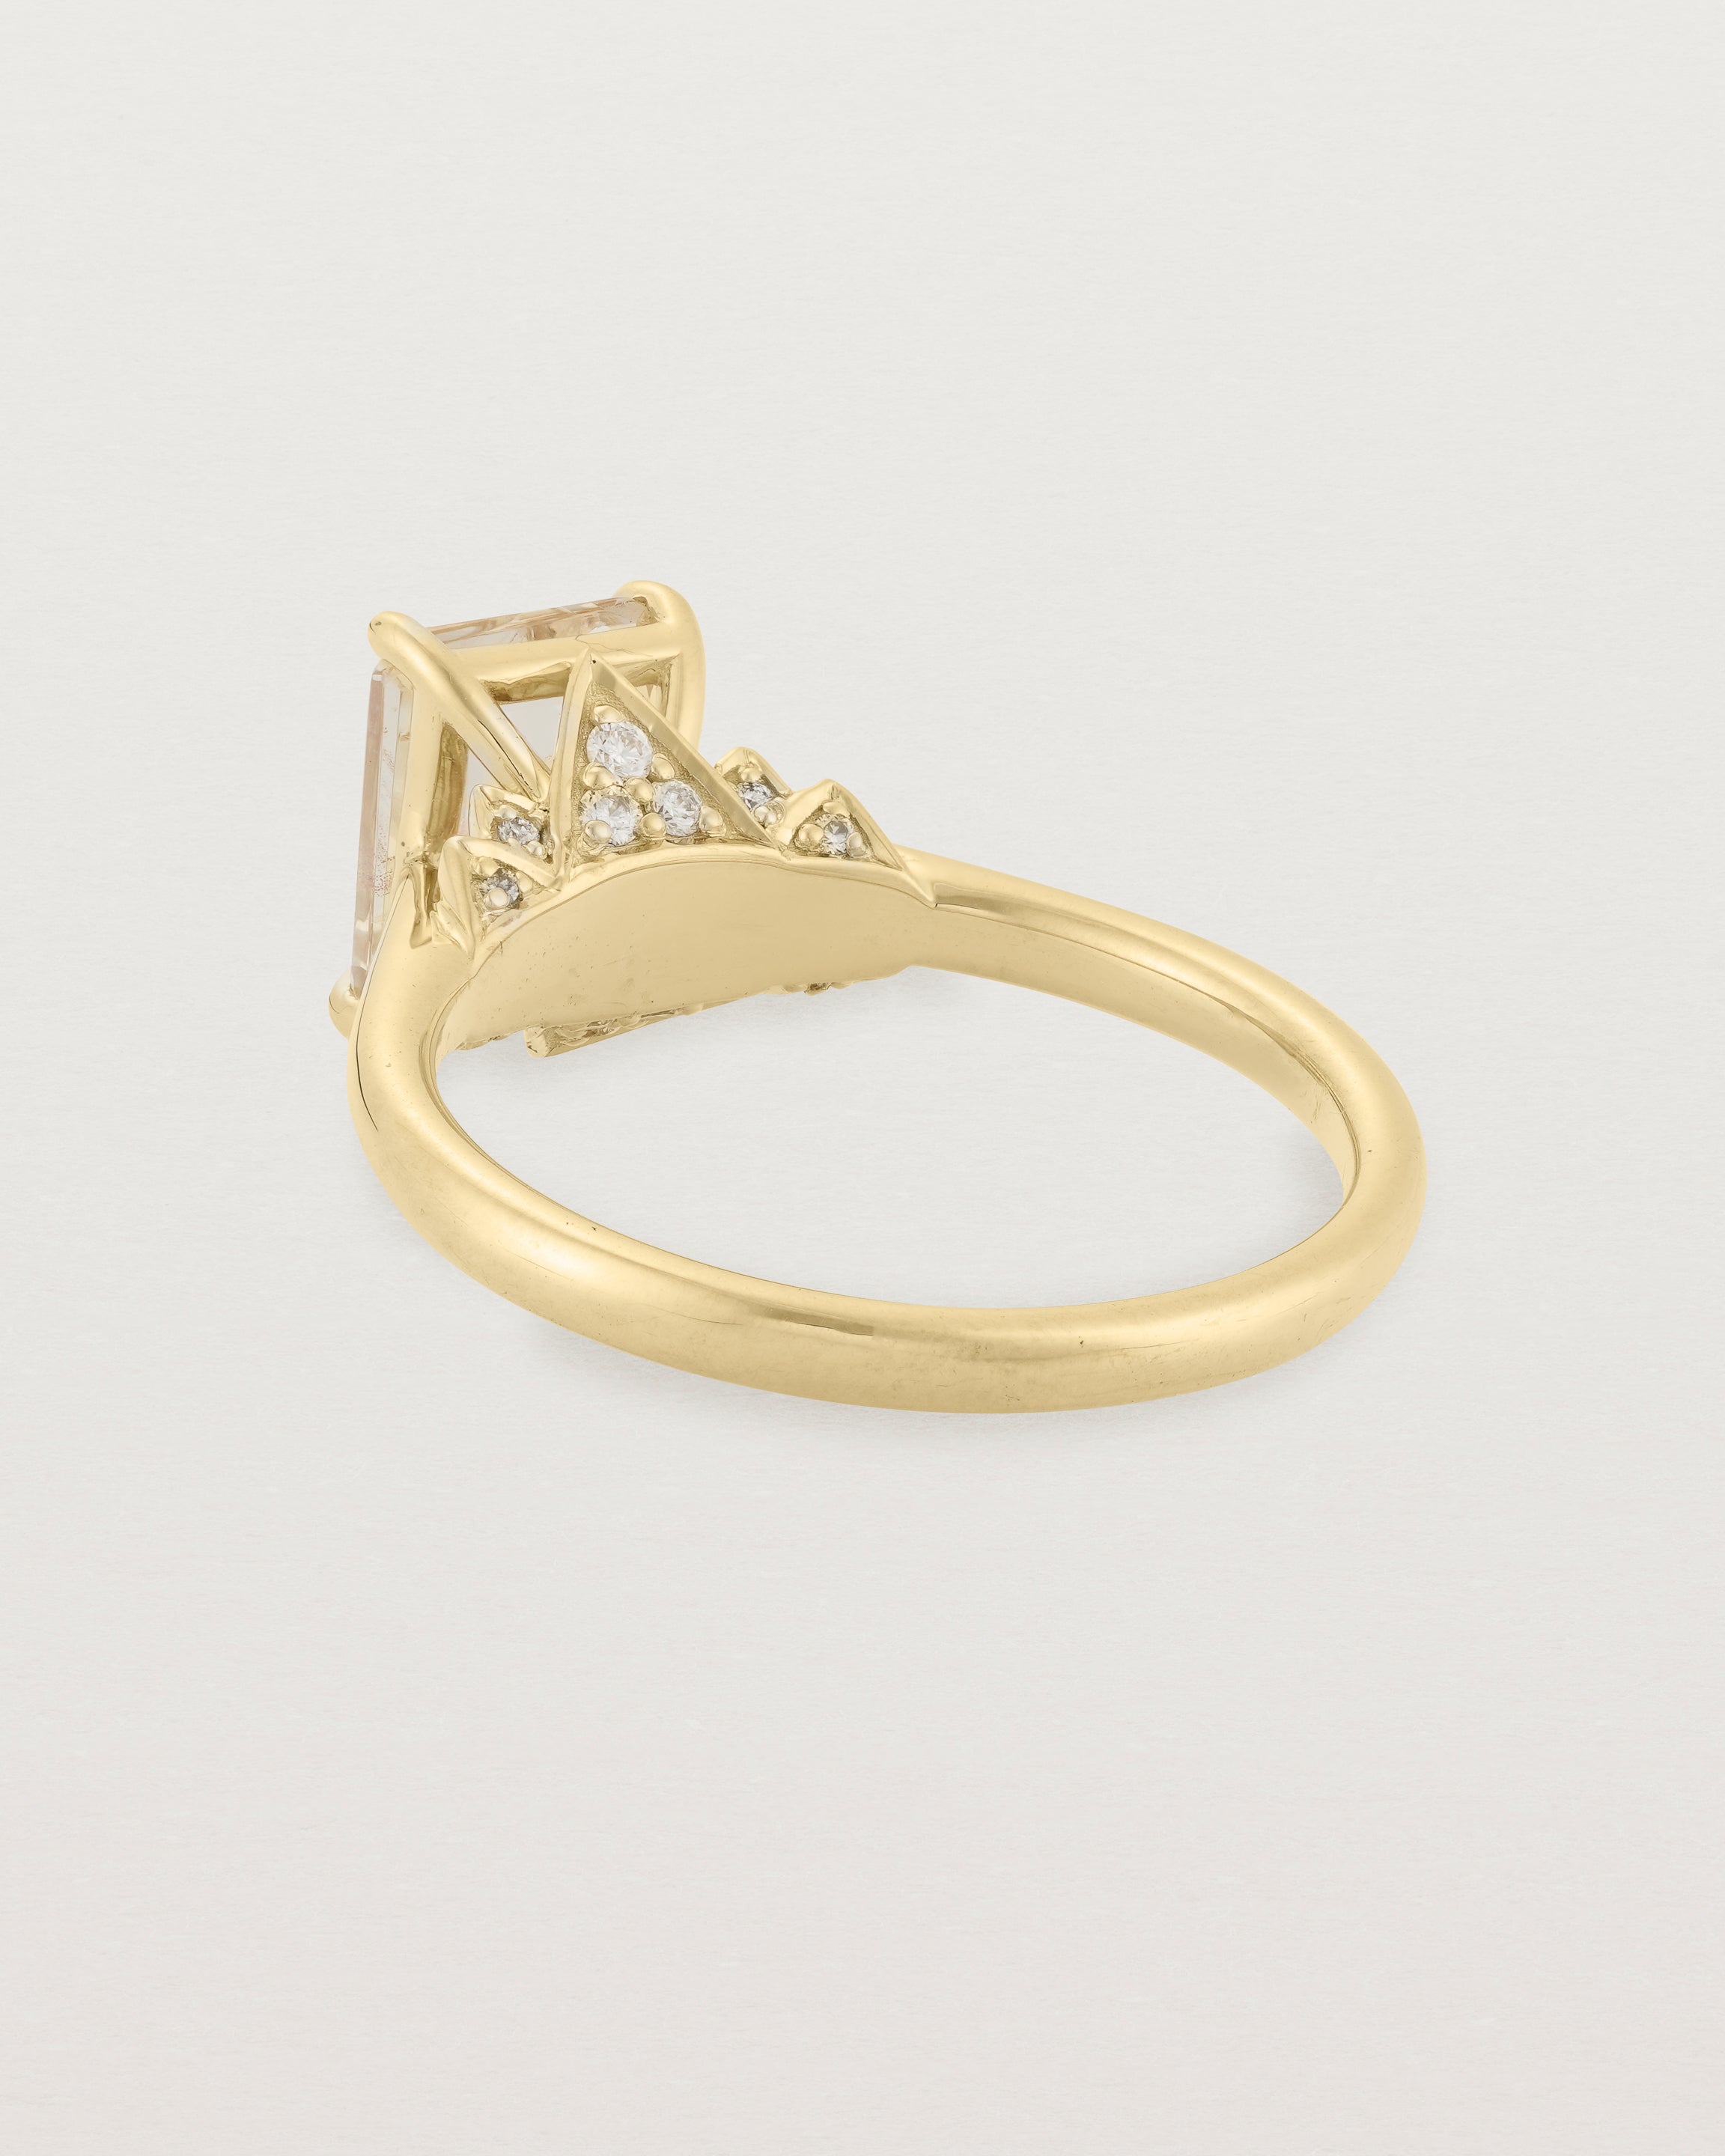 Back view of the Kalina Emerald Solitaire | Savannah Sunstone | Yellow Gold.